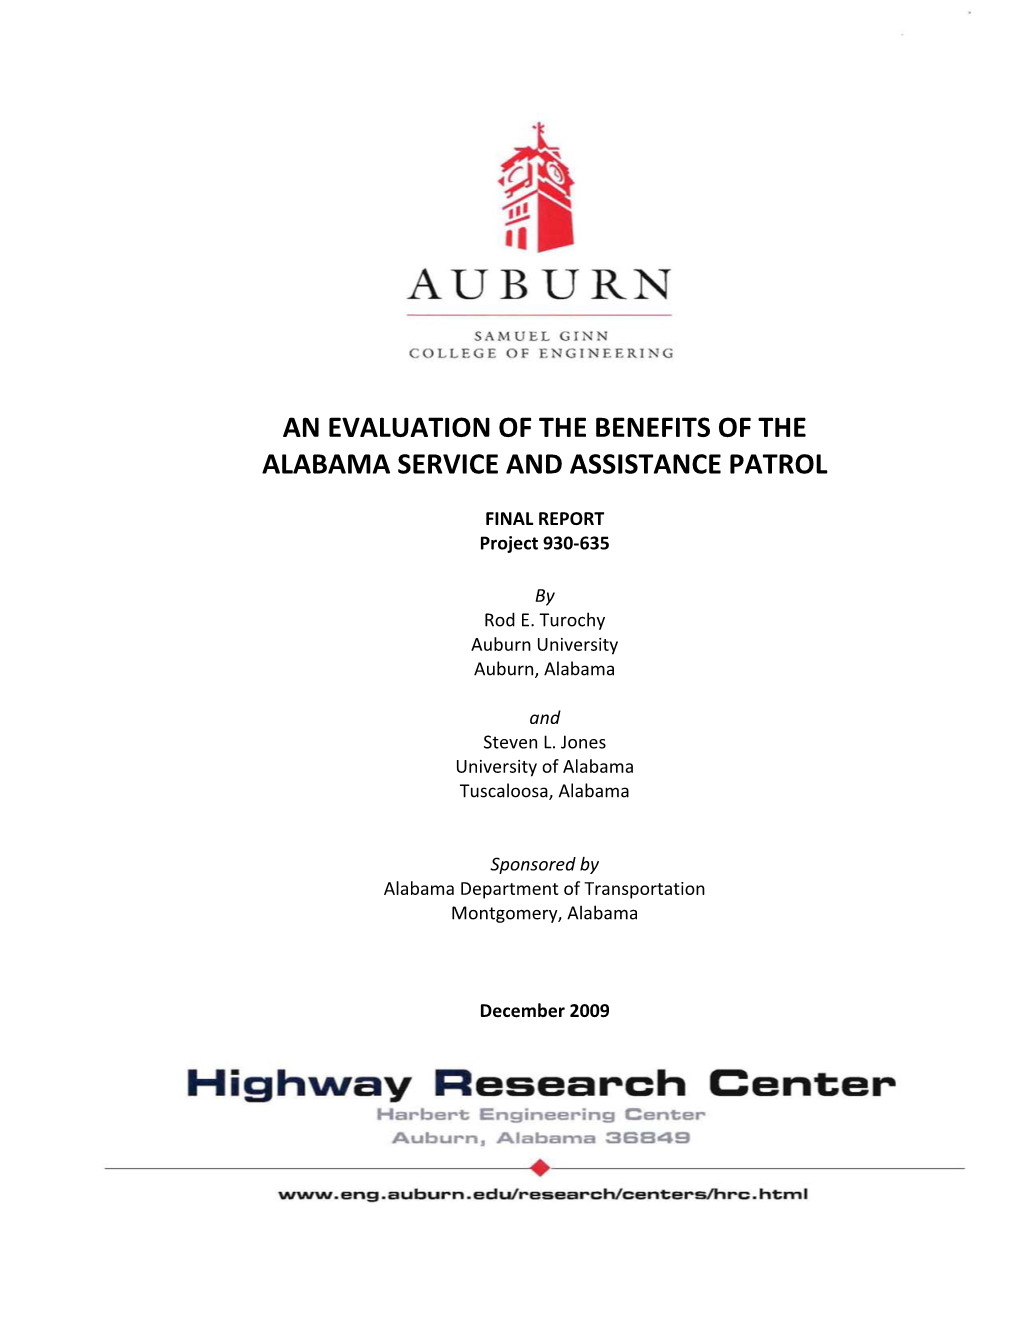 An Evaluation of the Benefits of the Alabama Service and Assistance Patrol